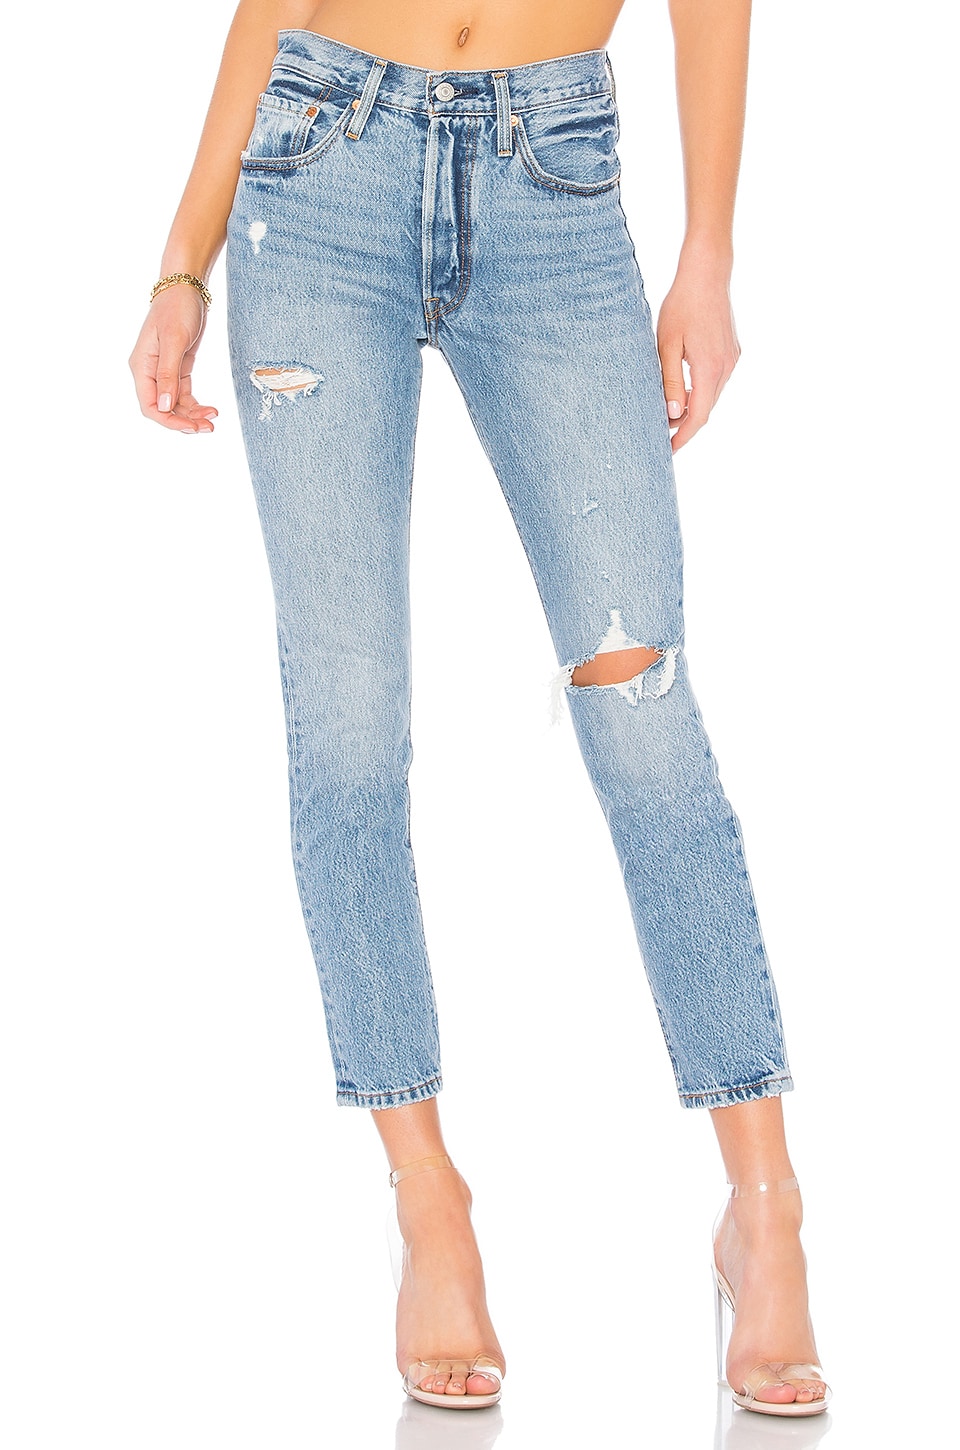 Slovenië glas monster LEVI'S 501 Skinny in Can't Touch This | REVOLVE